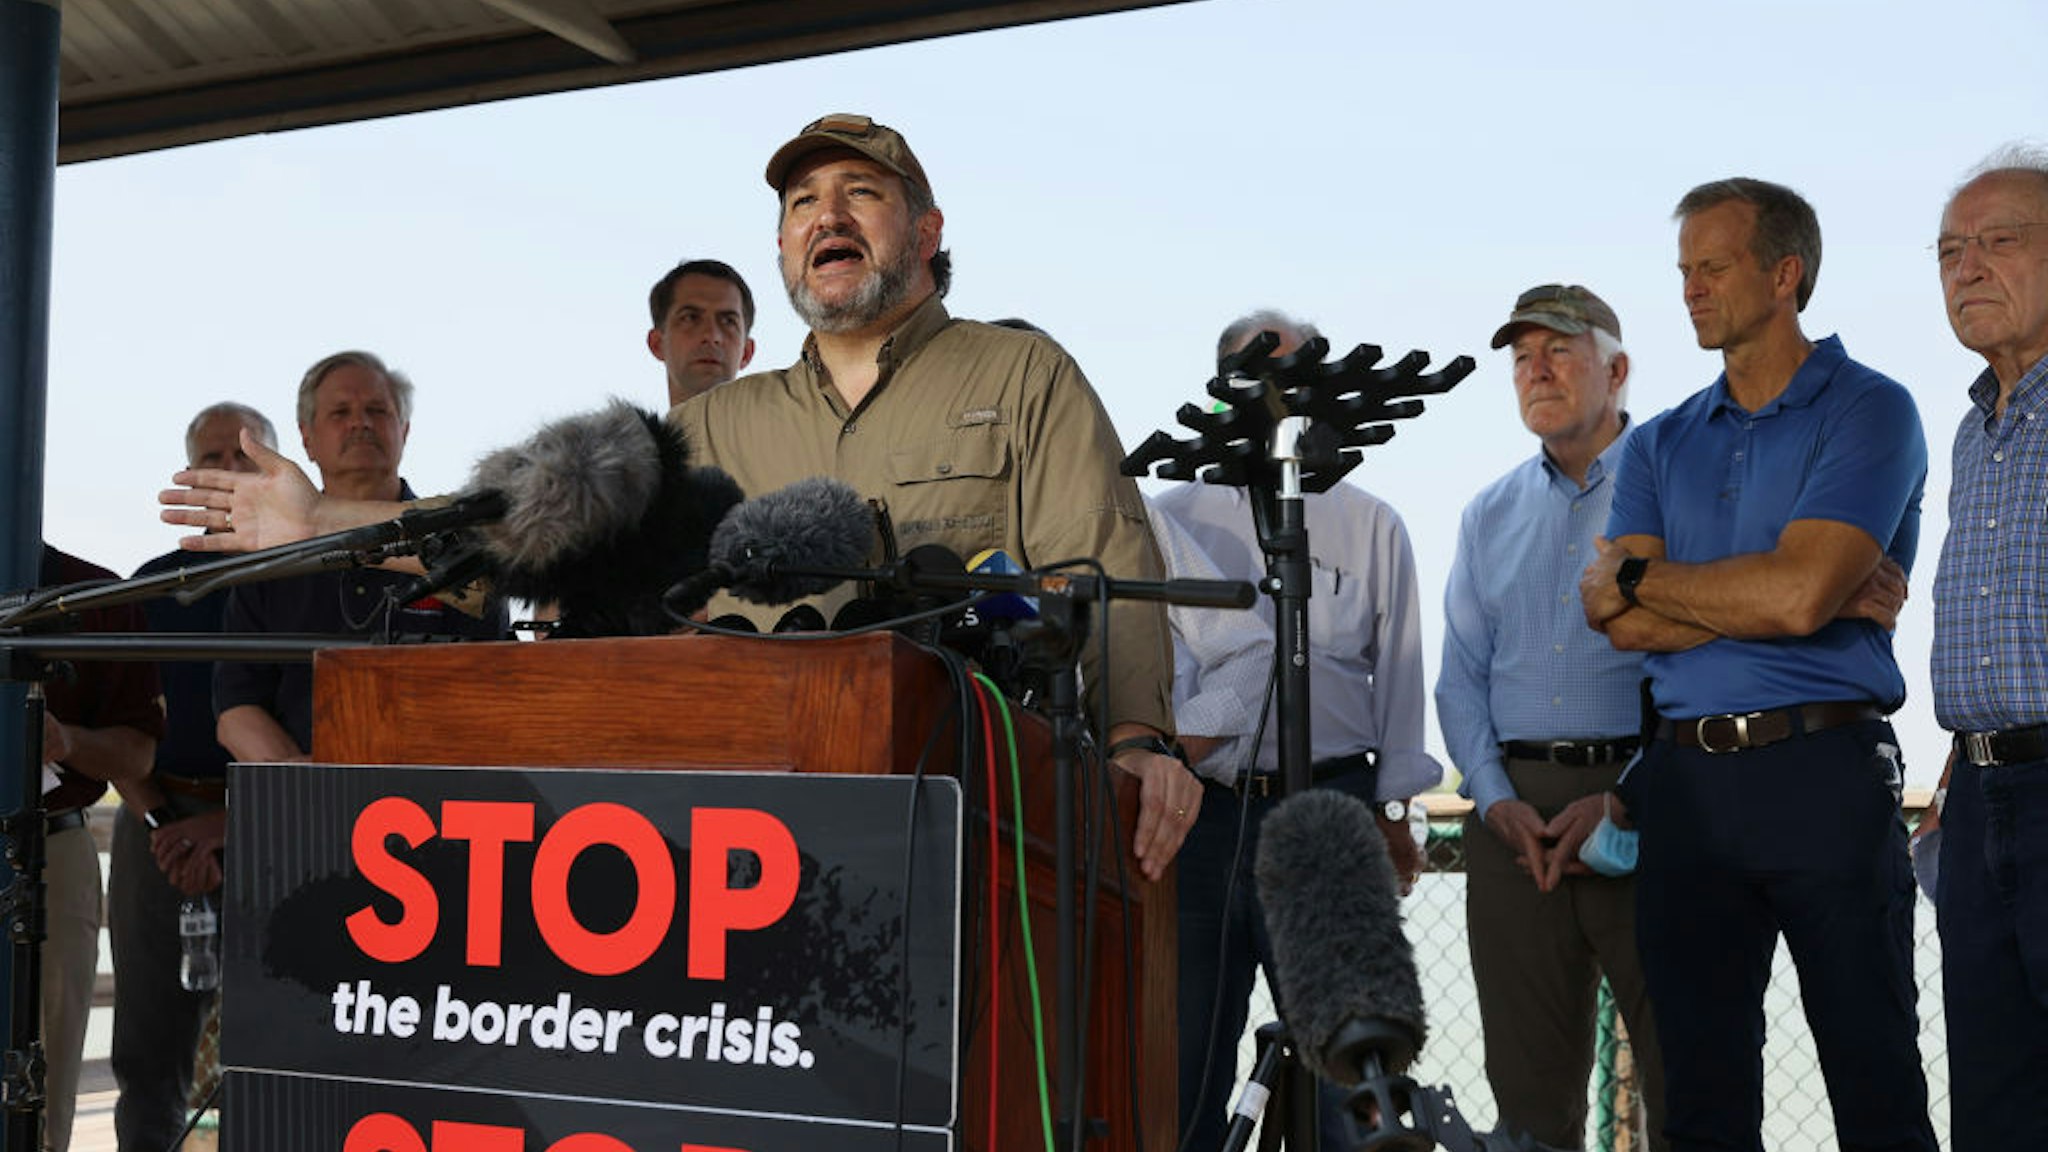 Sen. Ted Cruz (R-TX) speaks to the media after a tour of part of the Rio Grande river on a Texas Department of Public Safety boat on March 26, 2021 in Mission, Texas.